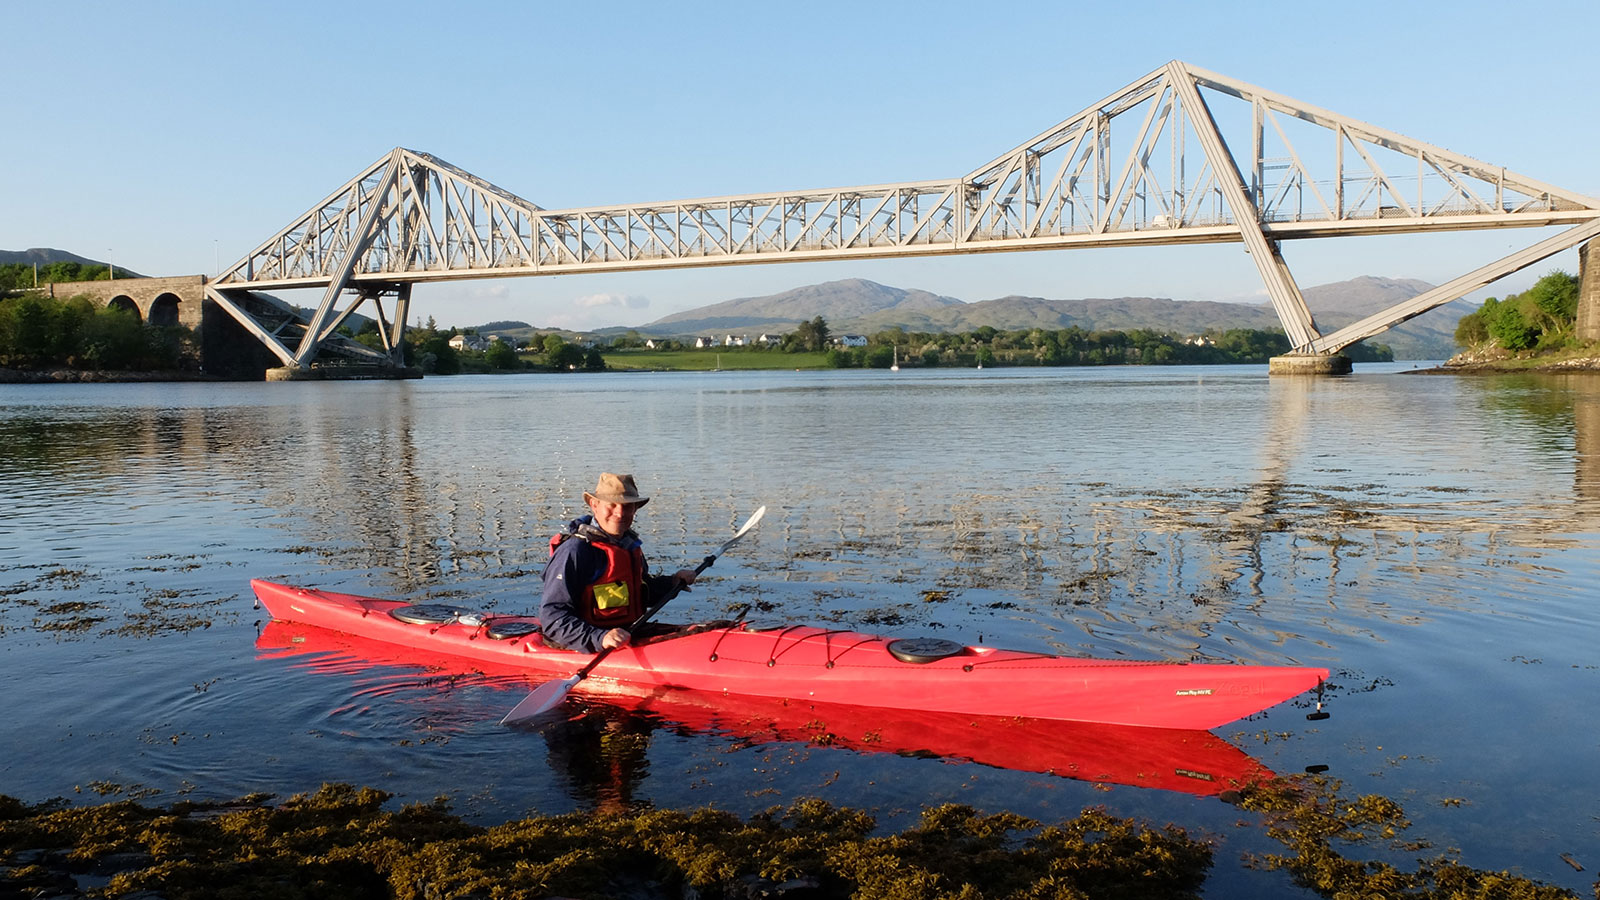 Grand Tours of Scottish Lochs. A man sits in a red cayak with a paddle. A bridge is behind him.